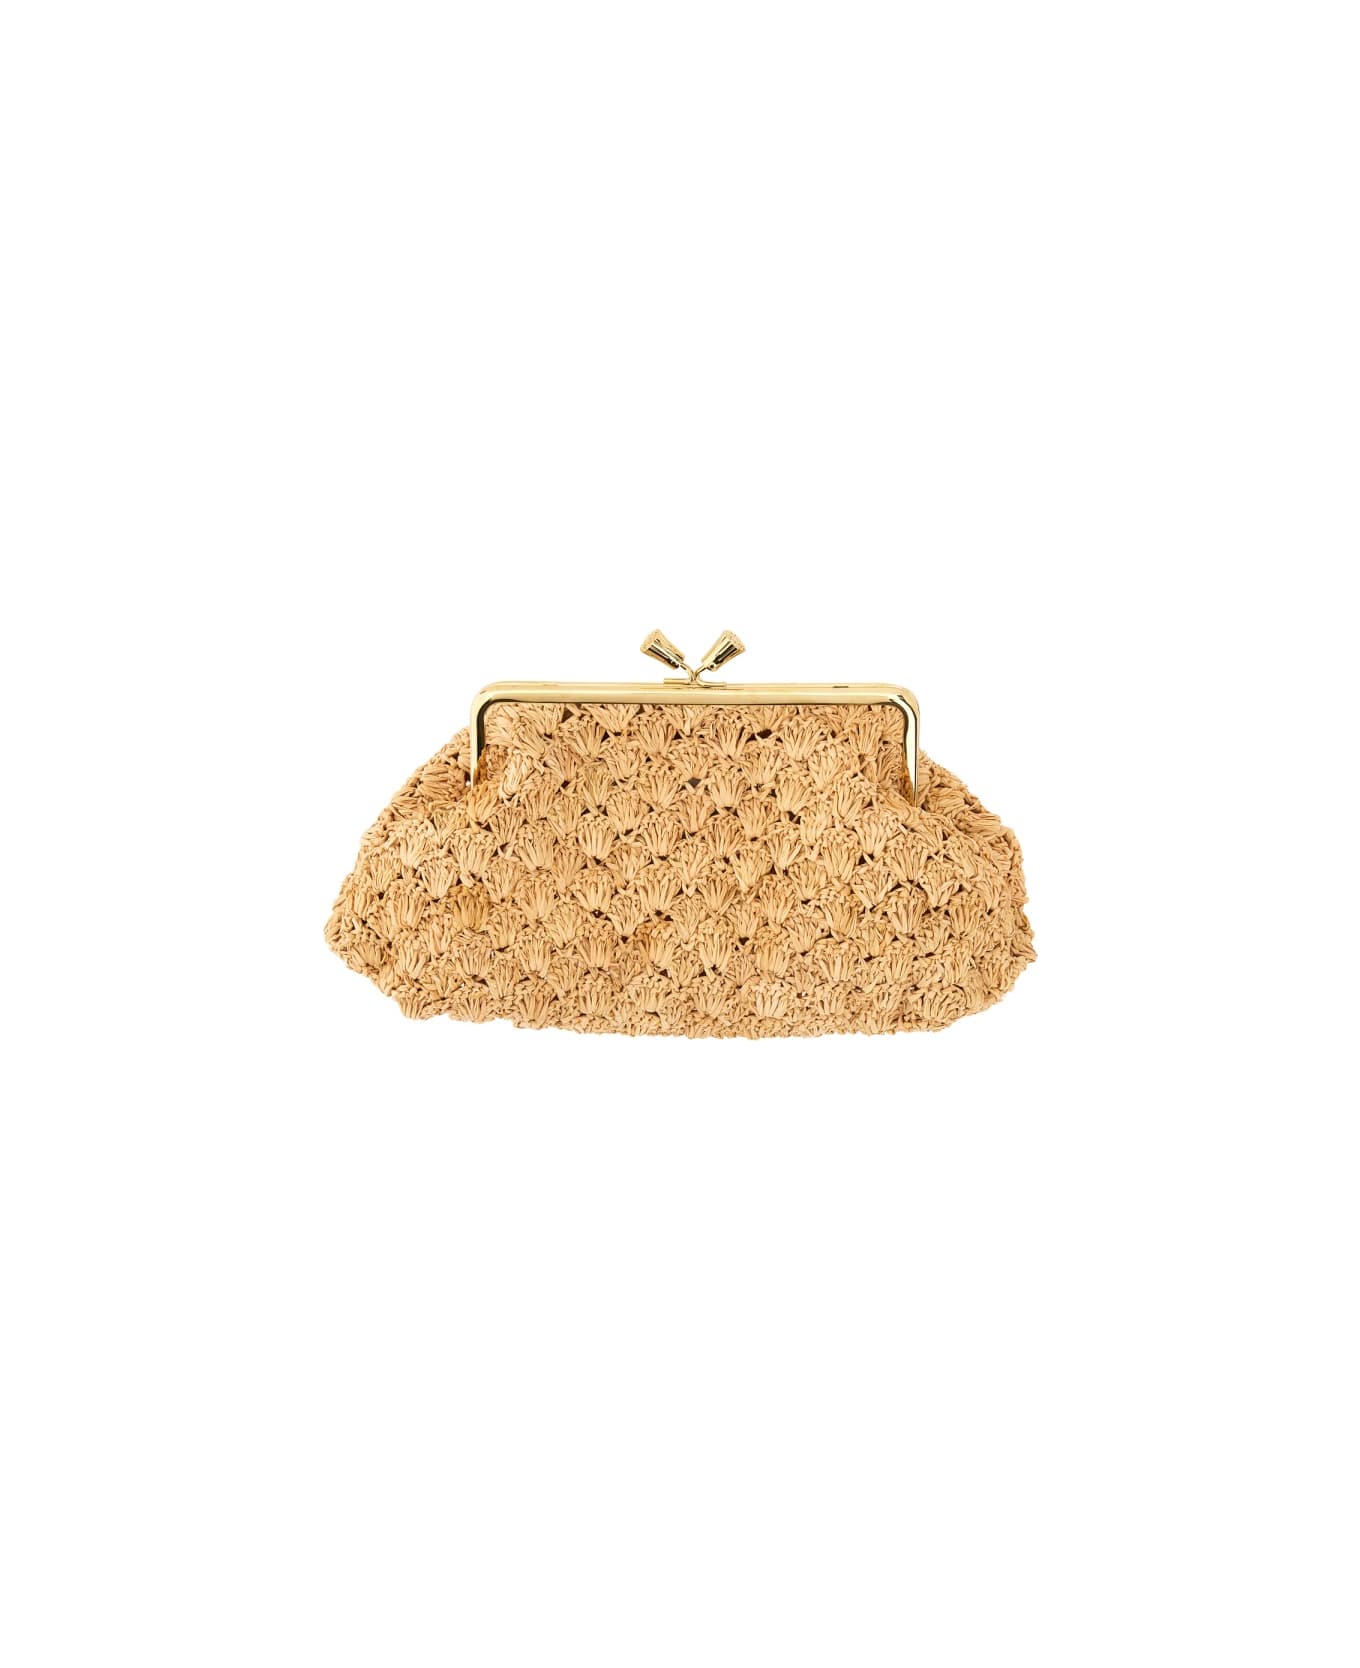 Anya Hindmarch Clutch "maud" Large - BEIGE クラッチバッグ